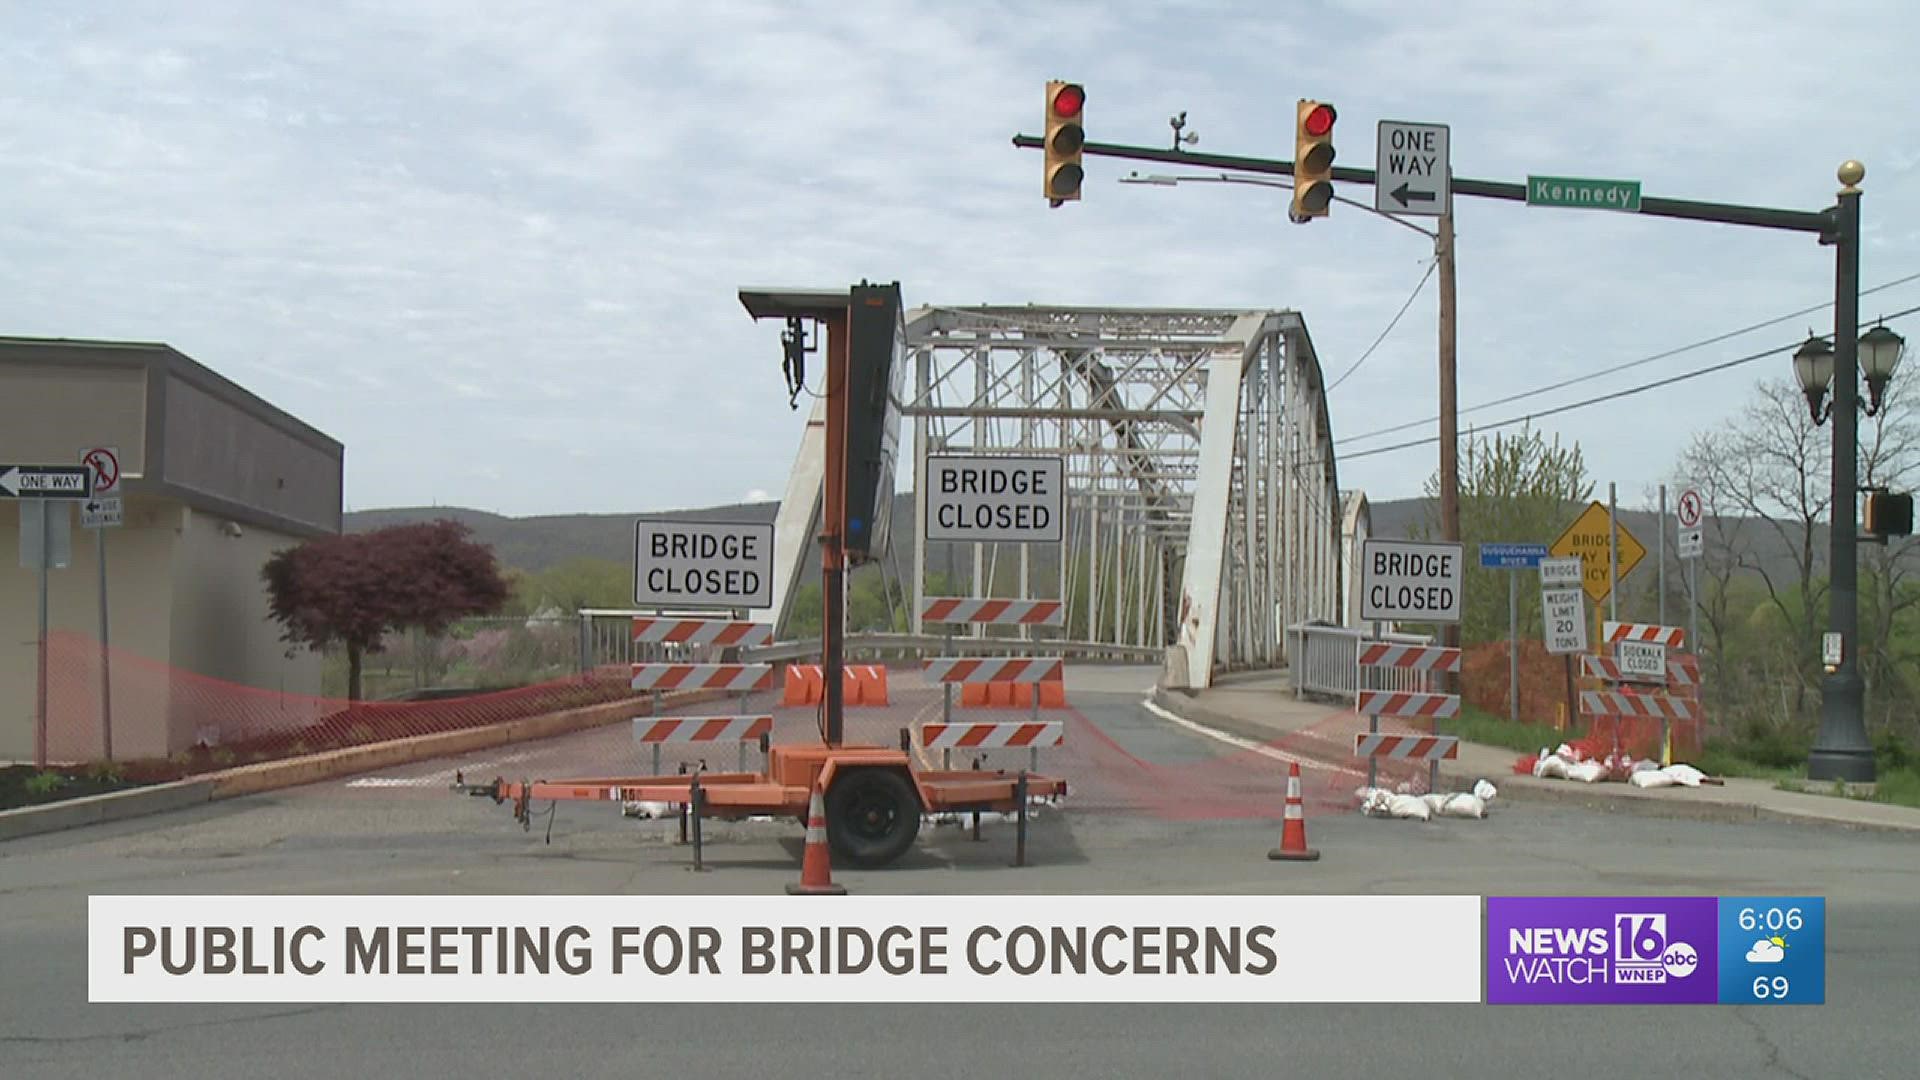 The public gets an opportunity to learn about solutions to the bridge problems that plague Pittston and West Pittston.